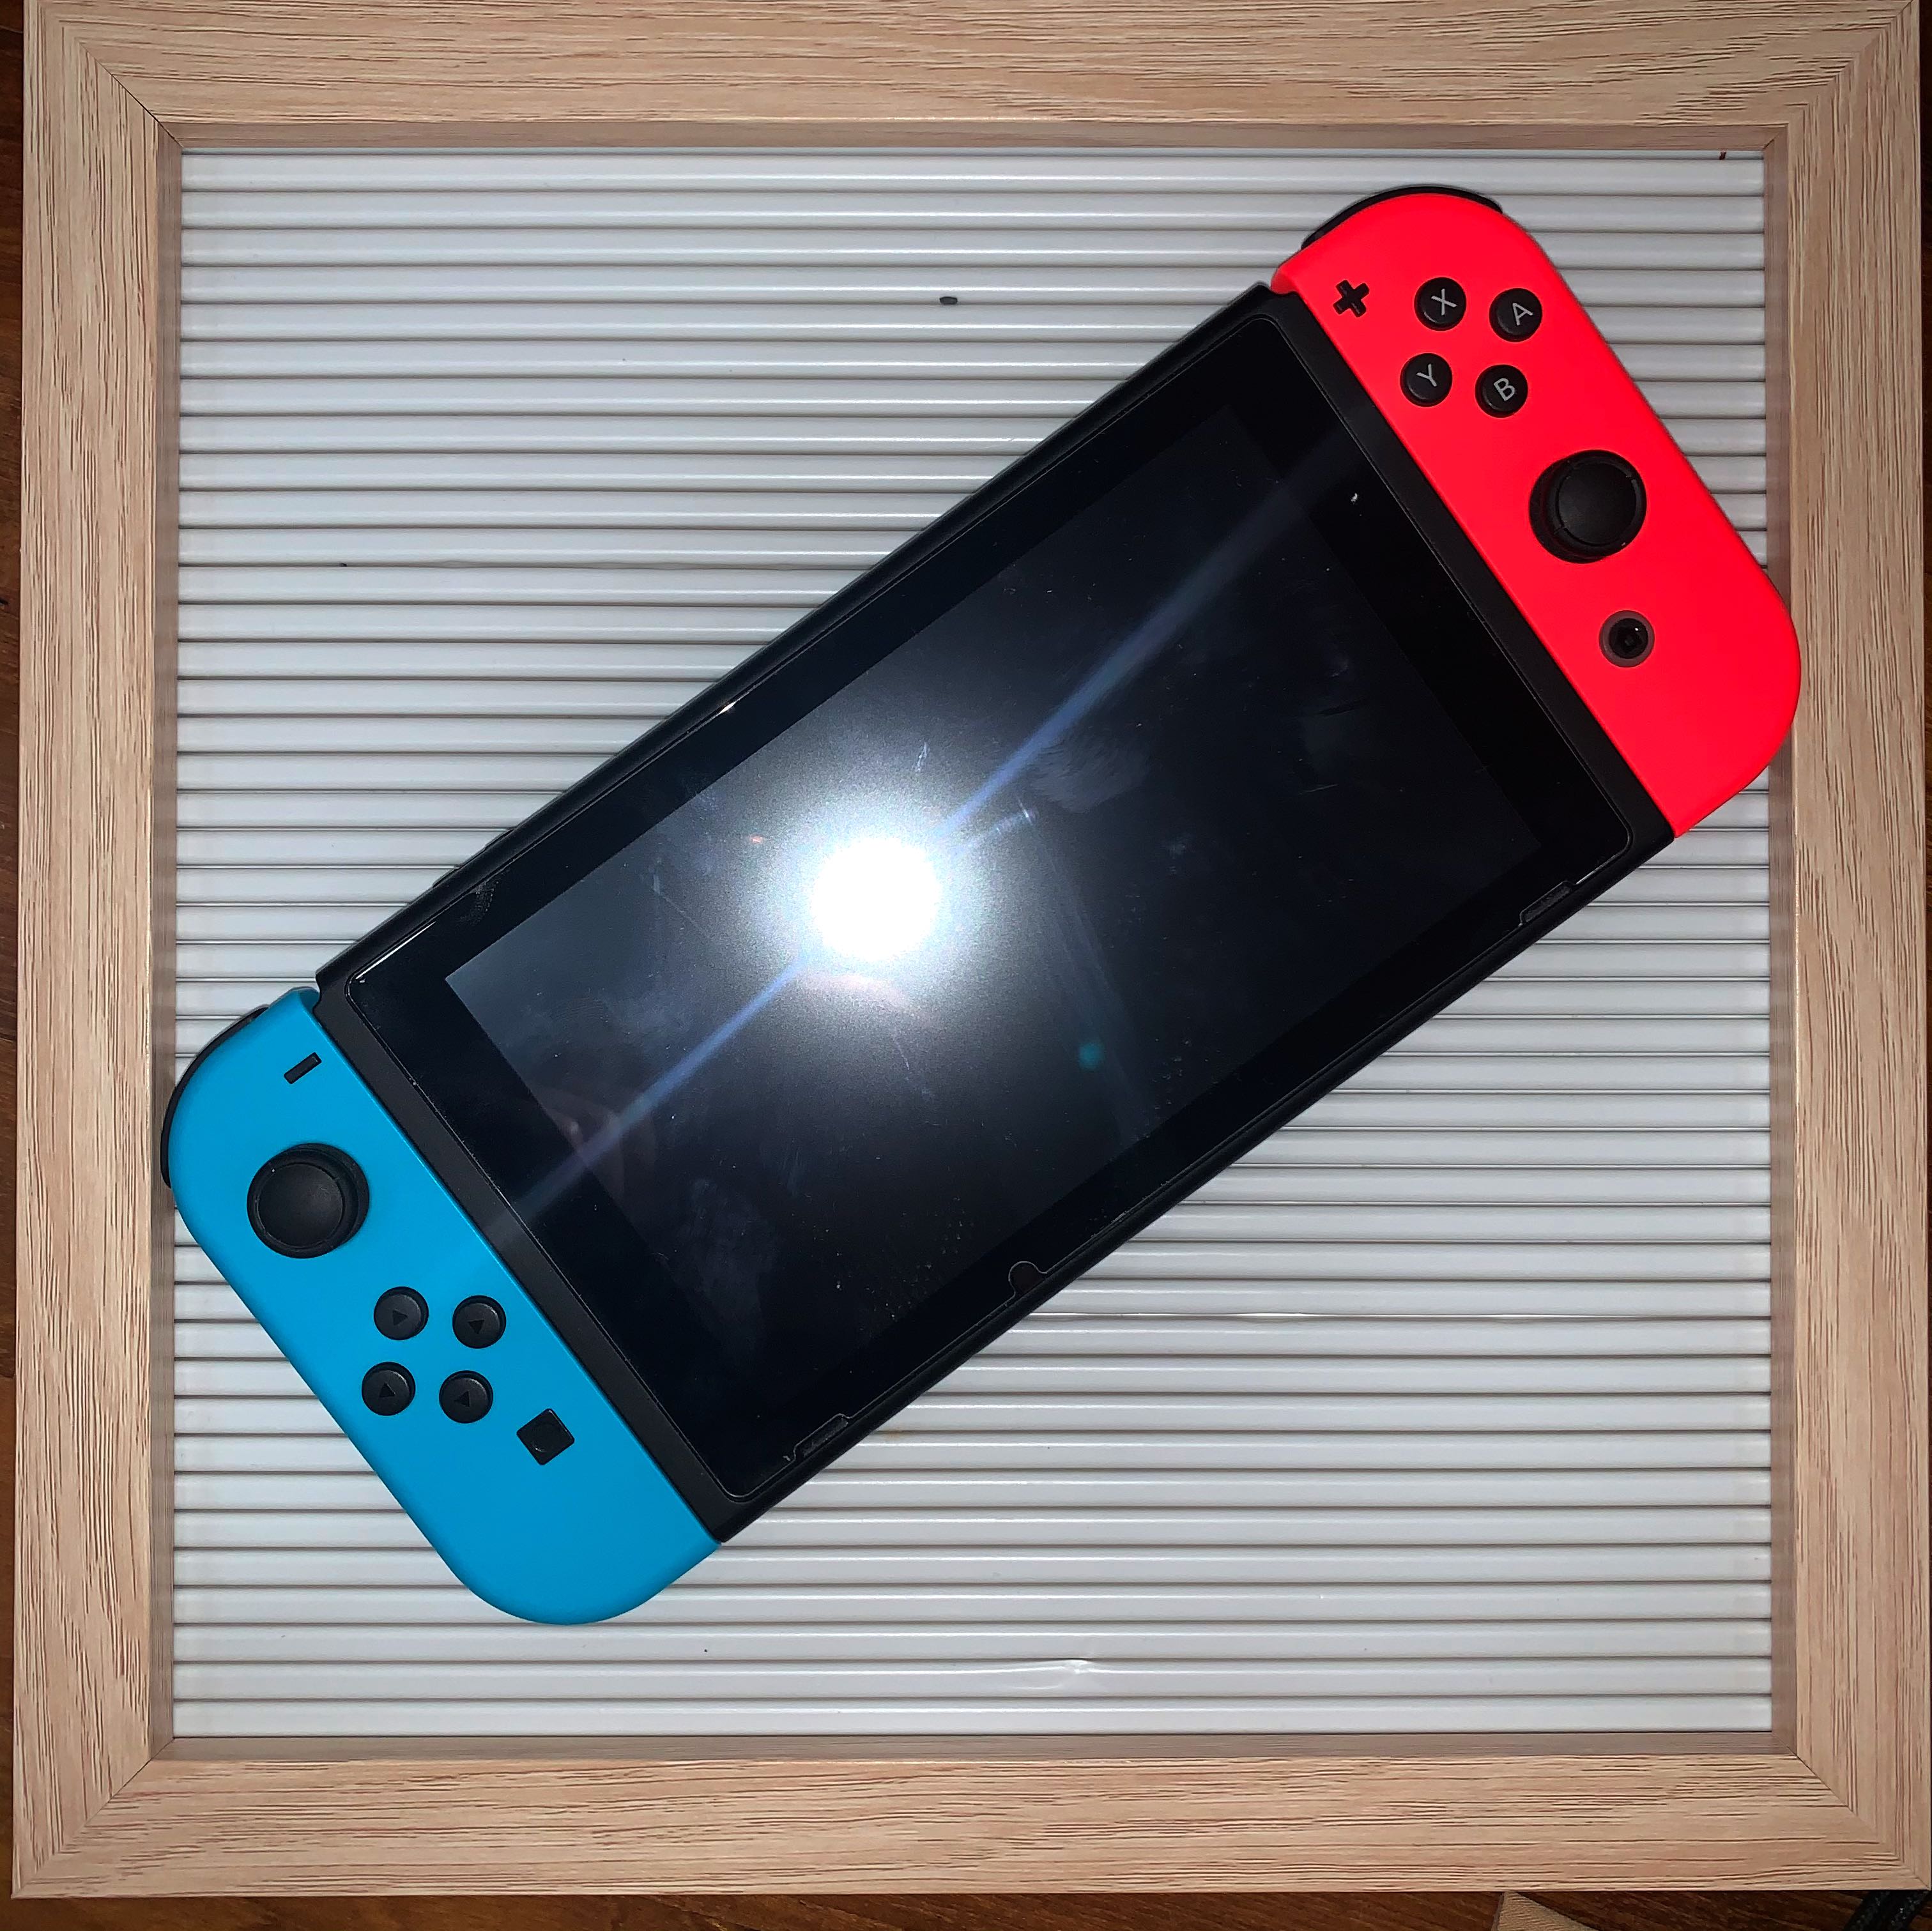 nintendo switch red and blue